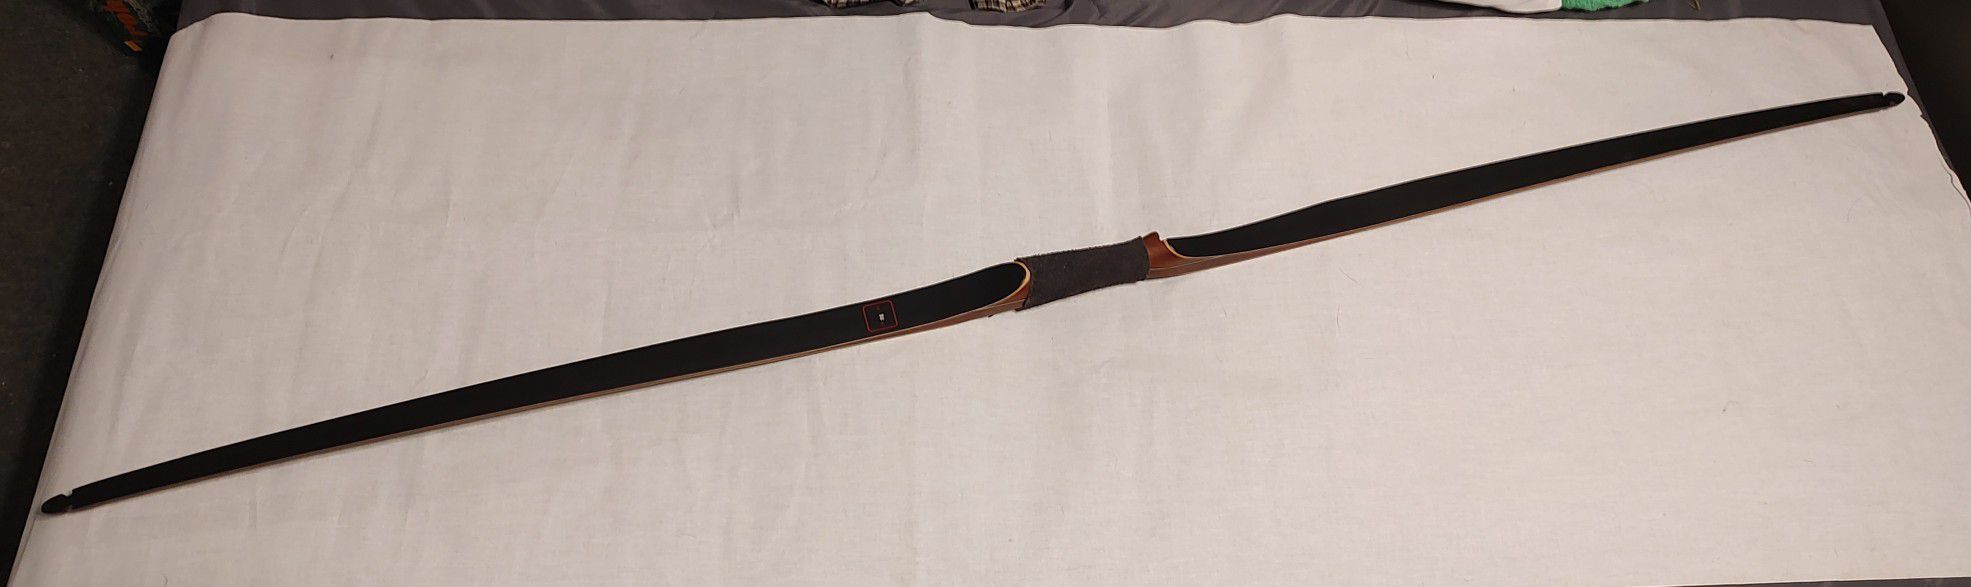 68" SAS Pioneer Traditional Wood Longbow 35 Lbs Southland Archery Supply